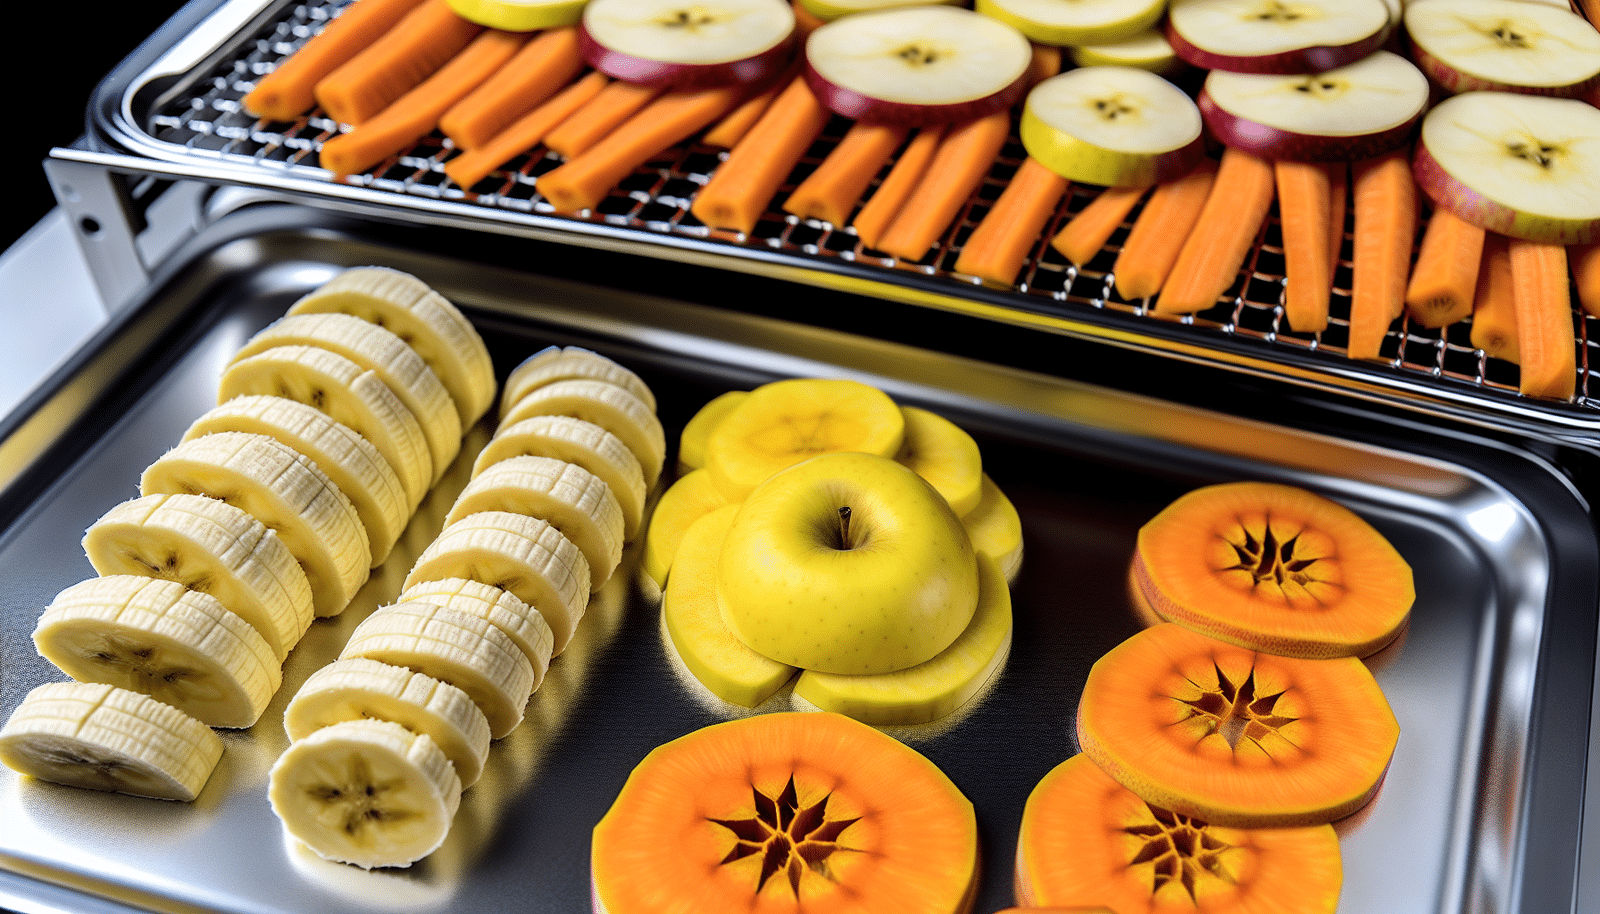 A variety of fruits and vegetables laid out on dehydrator trays